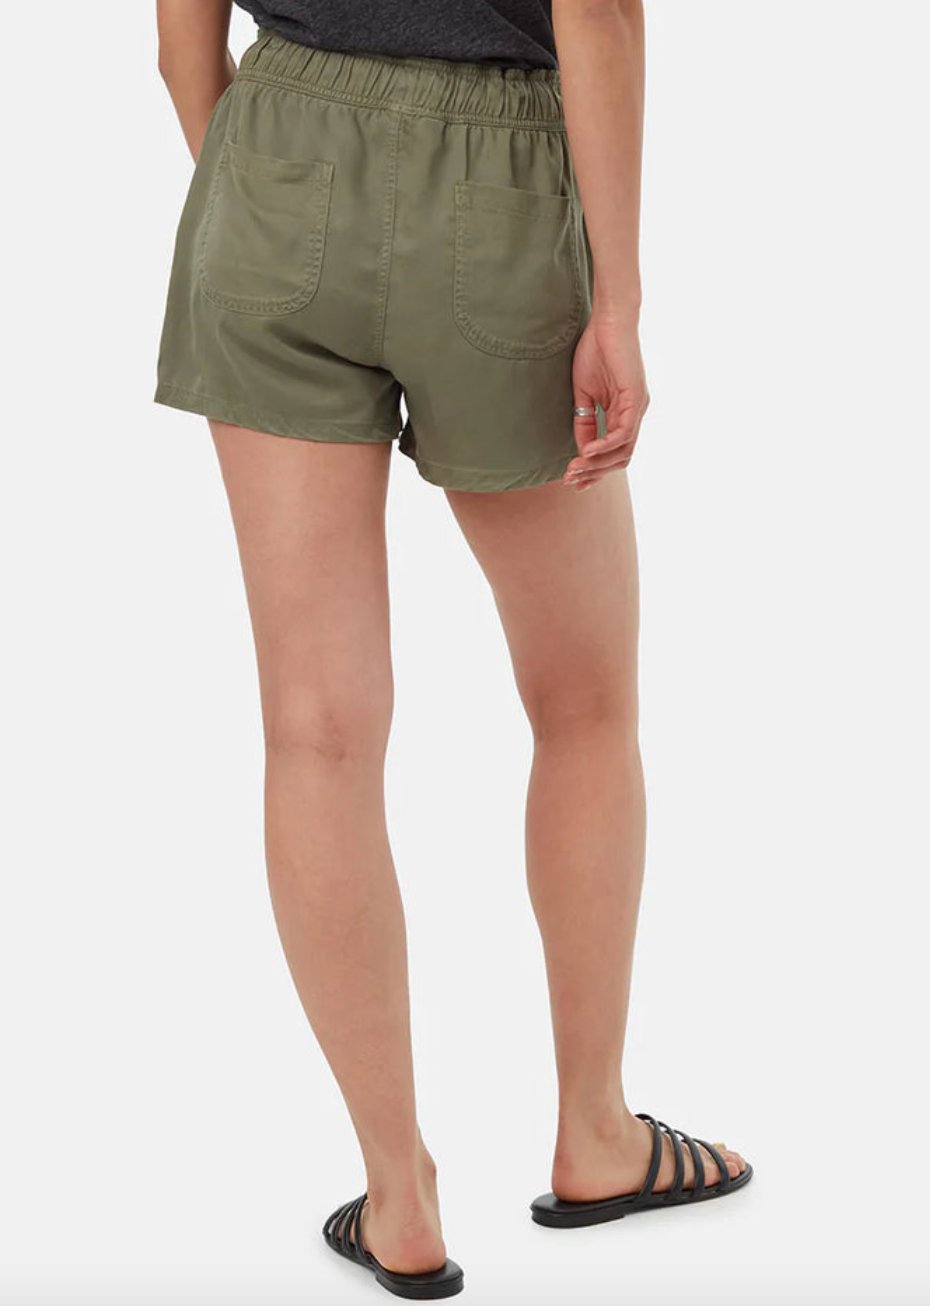 Instow Short Ws